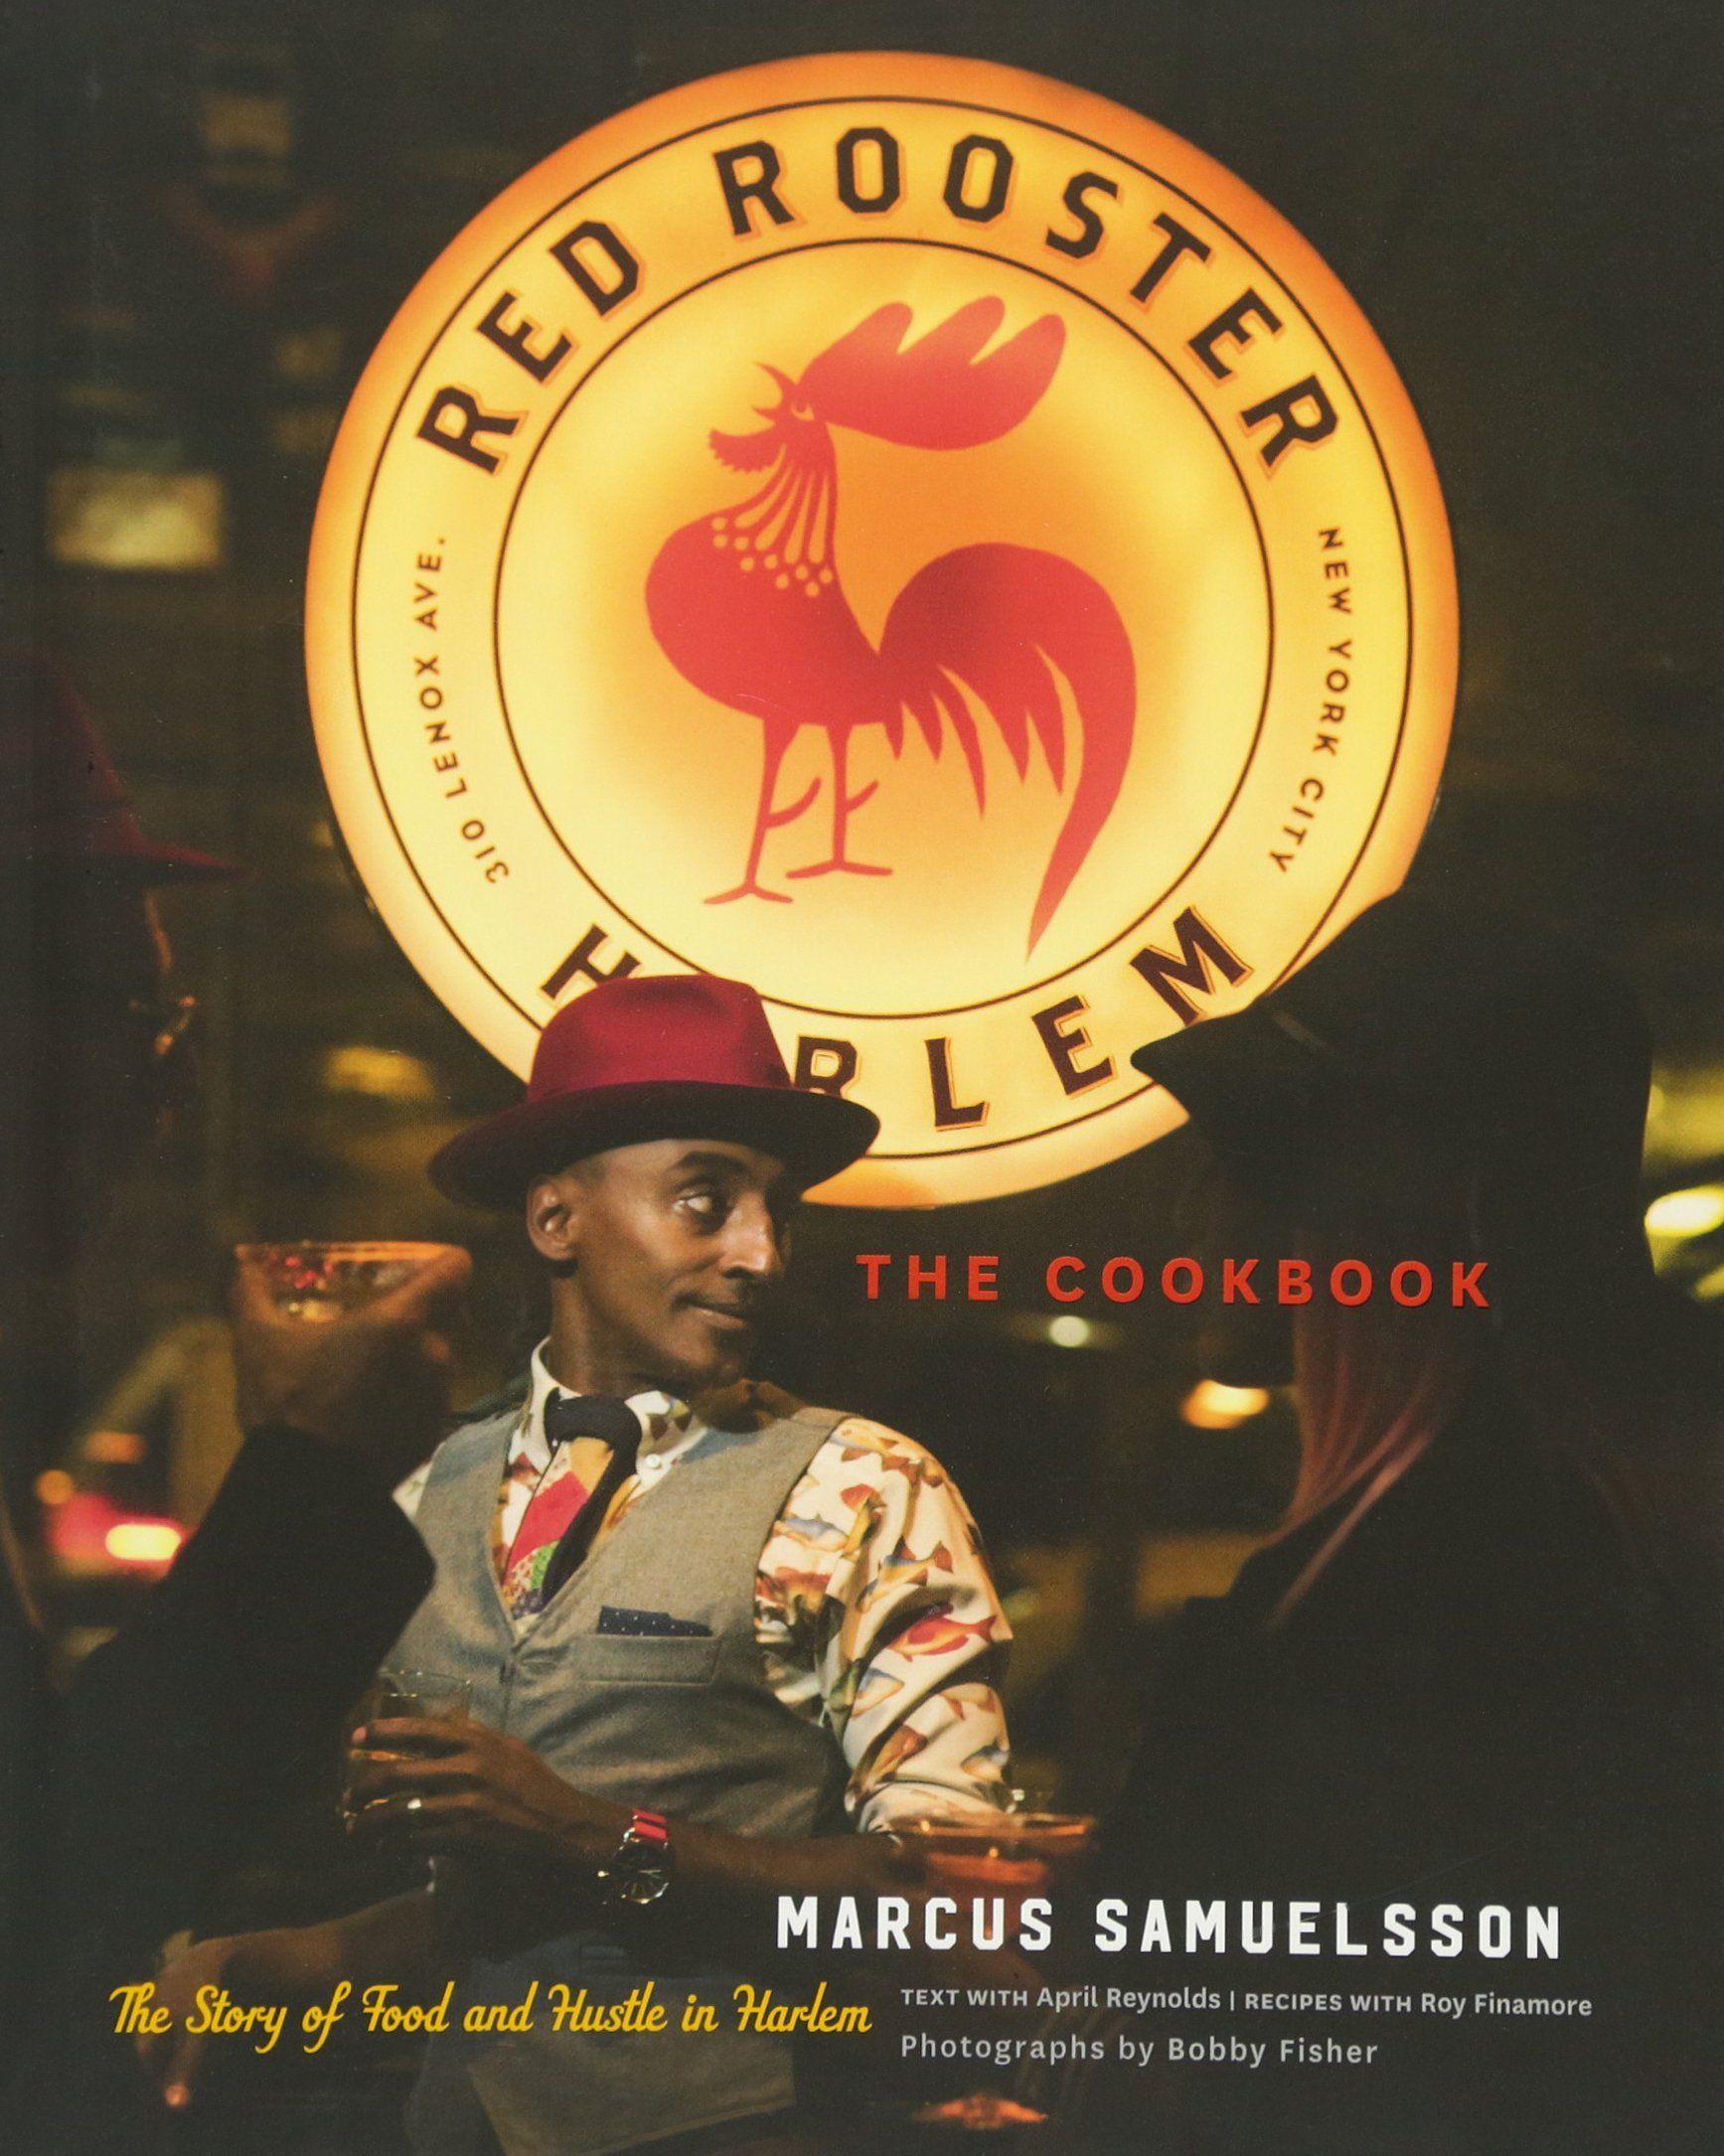 Black and Red Rooster Restaurant Logo - The Red Rooster Cookbook: The Story of Food and Hustle in Harlem